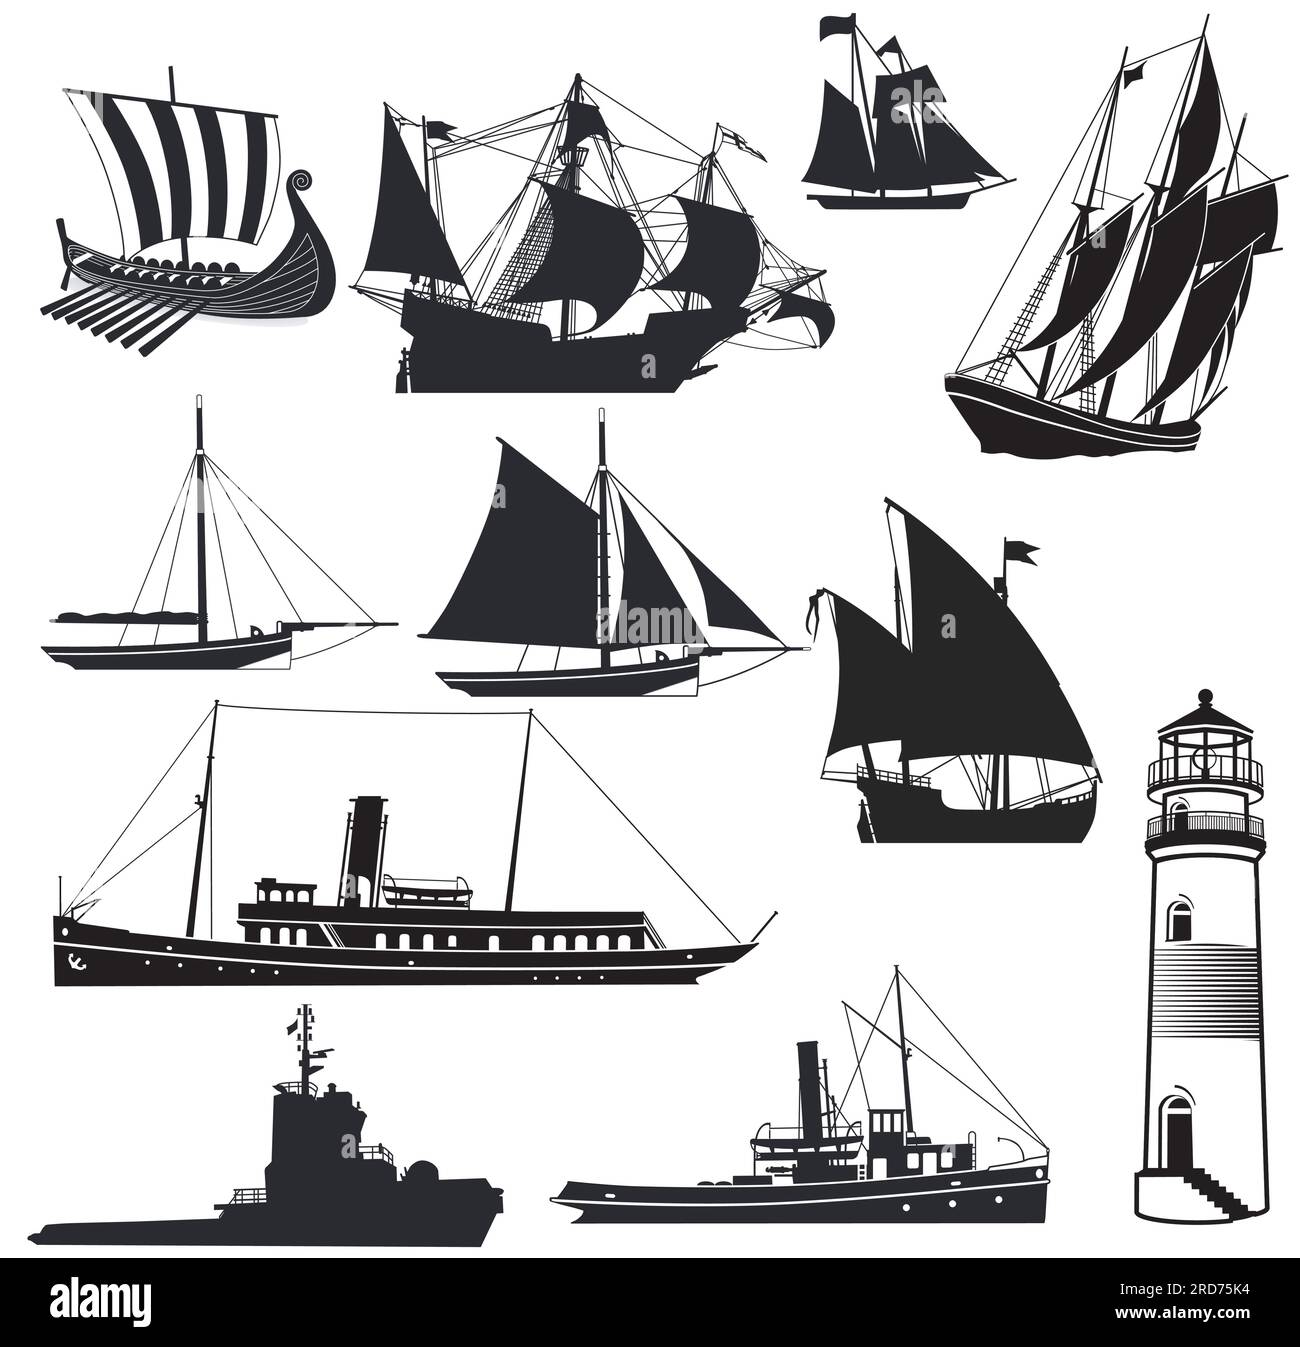 Lighthouse with ships and sailing ships isolated on white, illustration Stock Vector